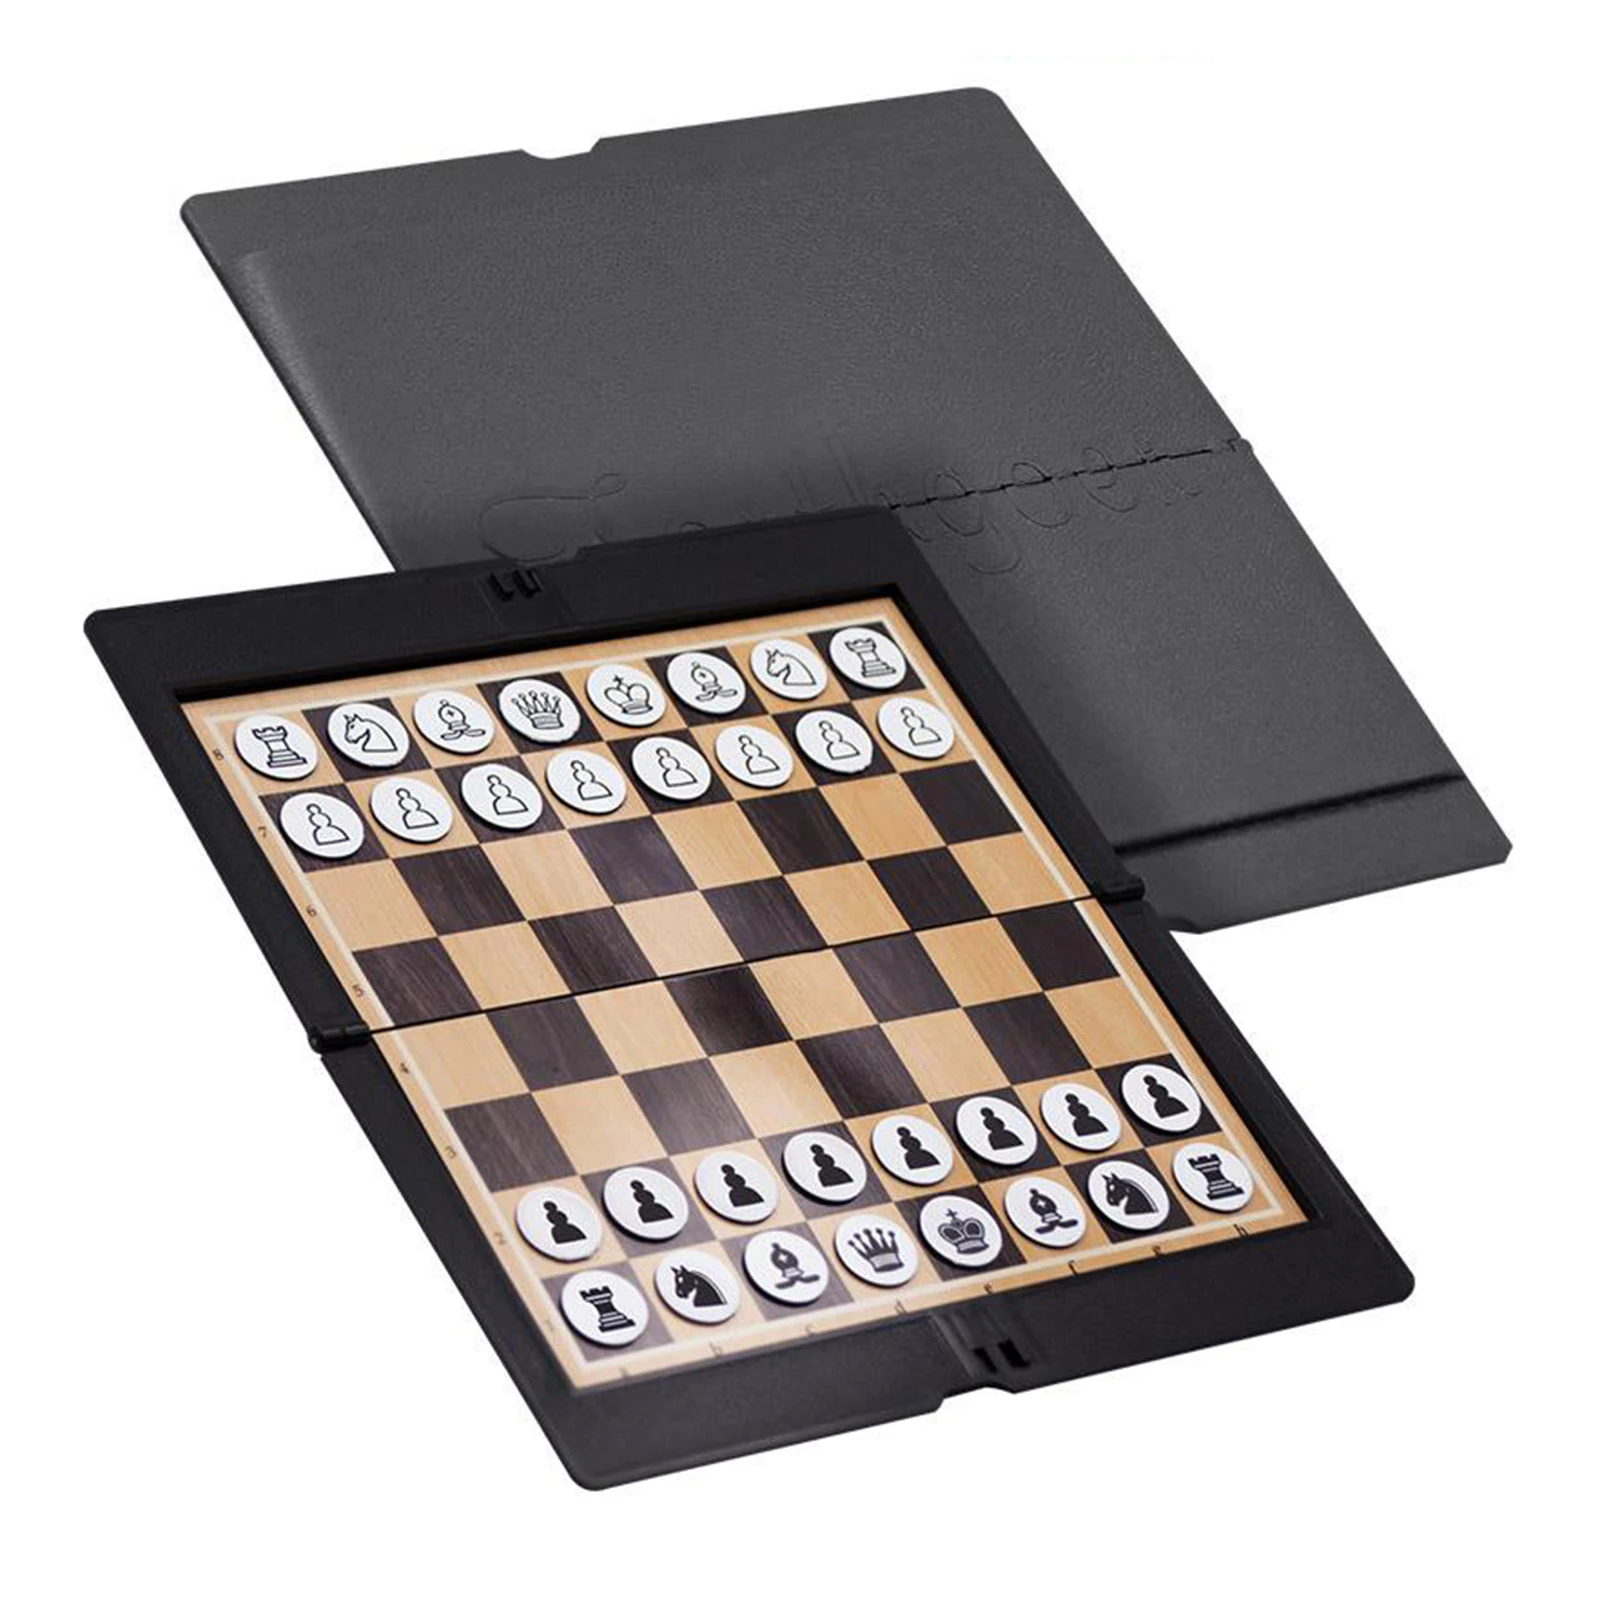 Magnetic Folding Chess Board Portable Set High Quality Games Camping Travel 